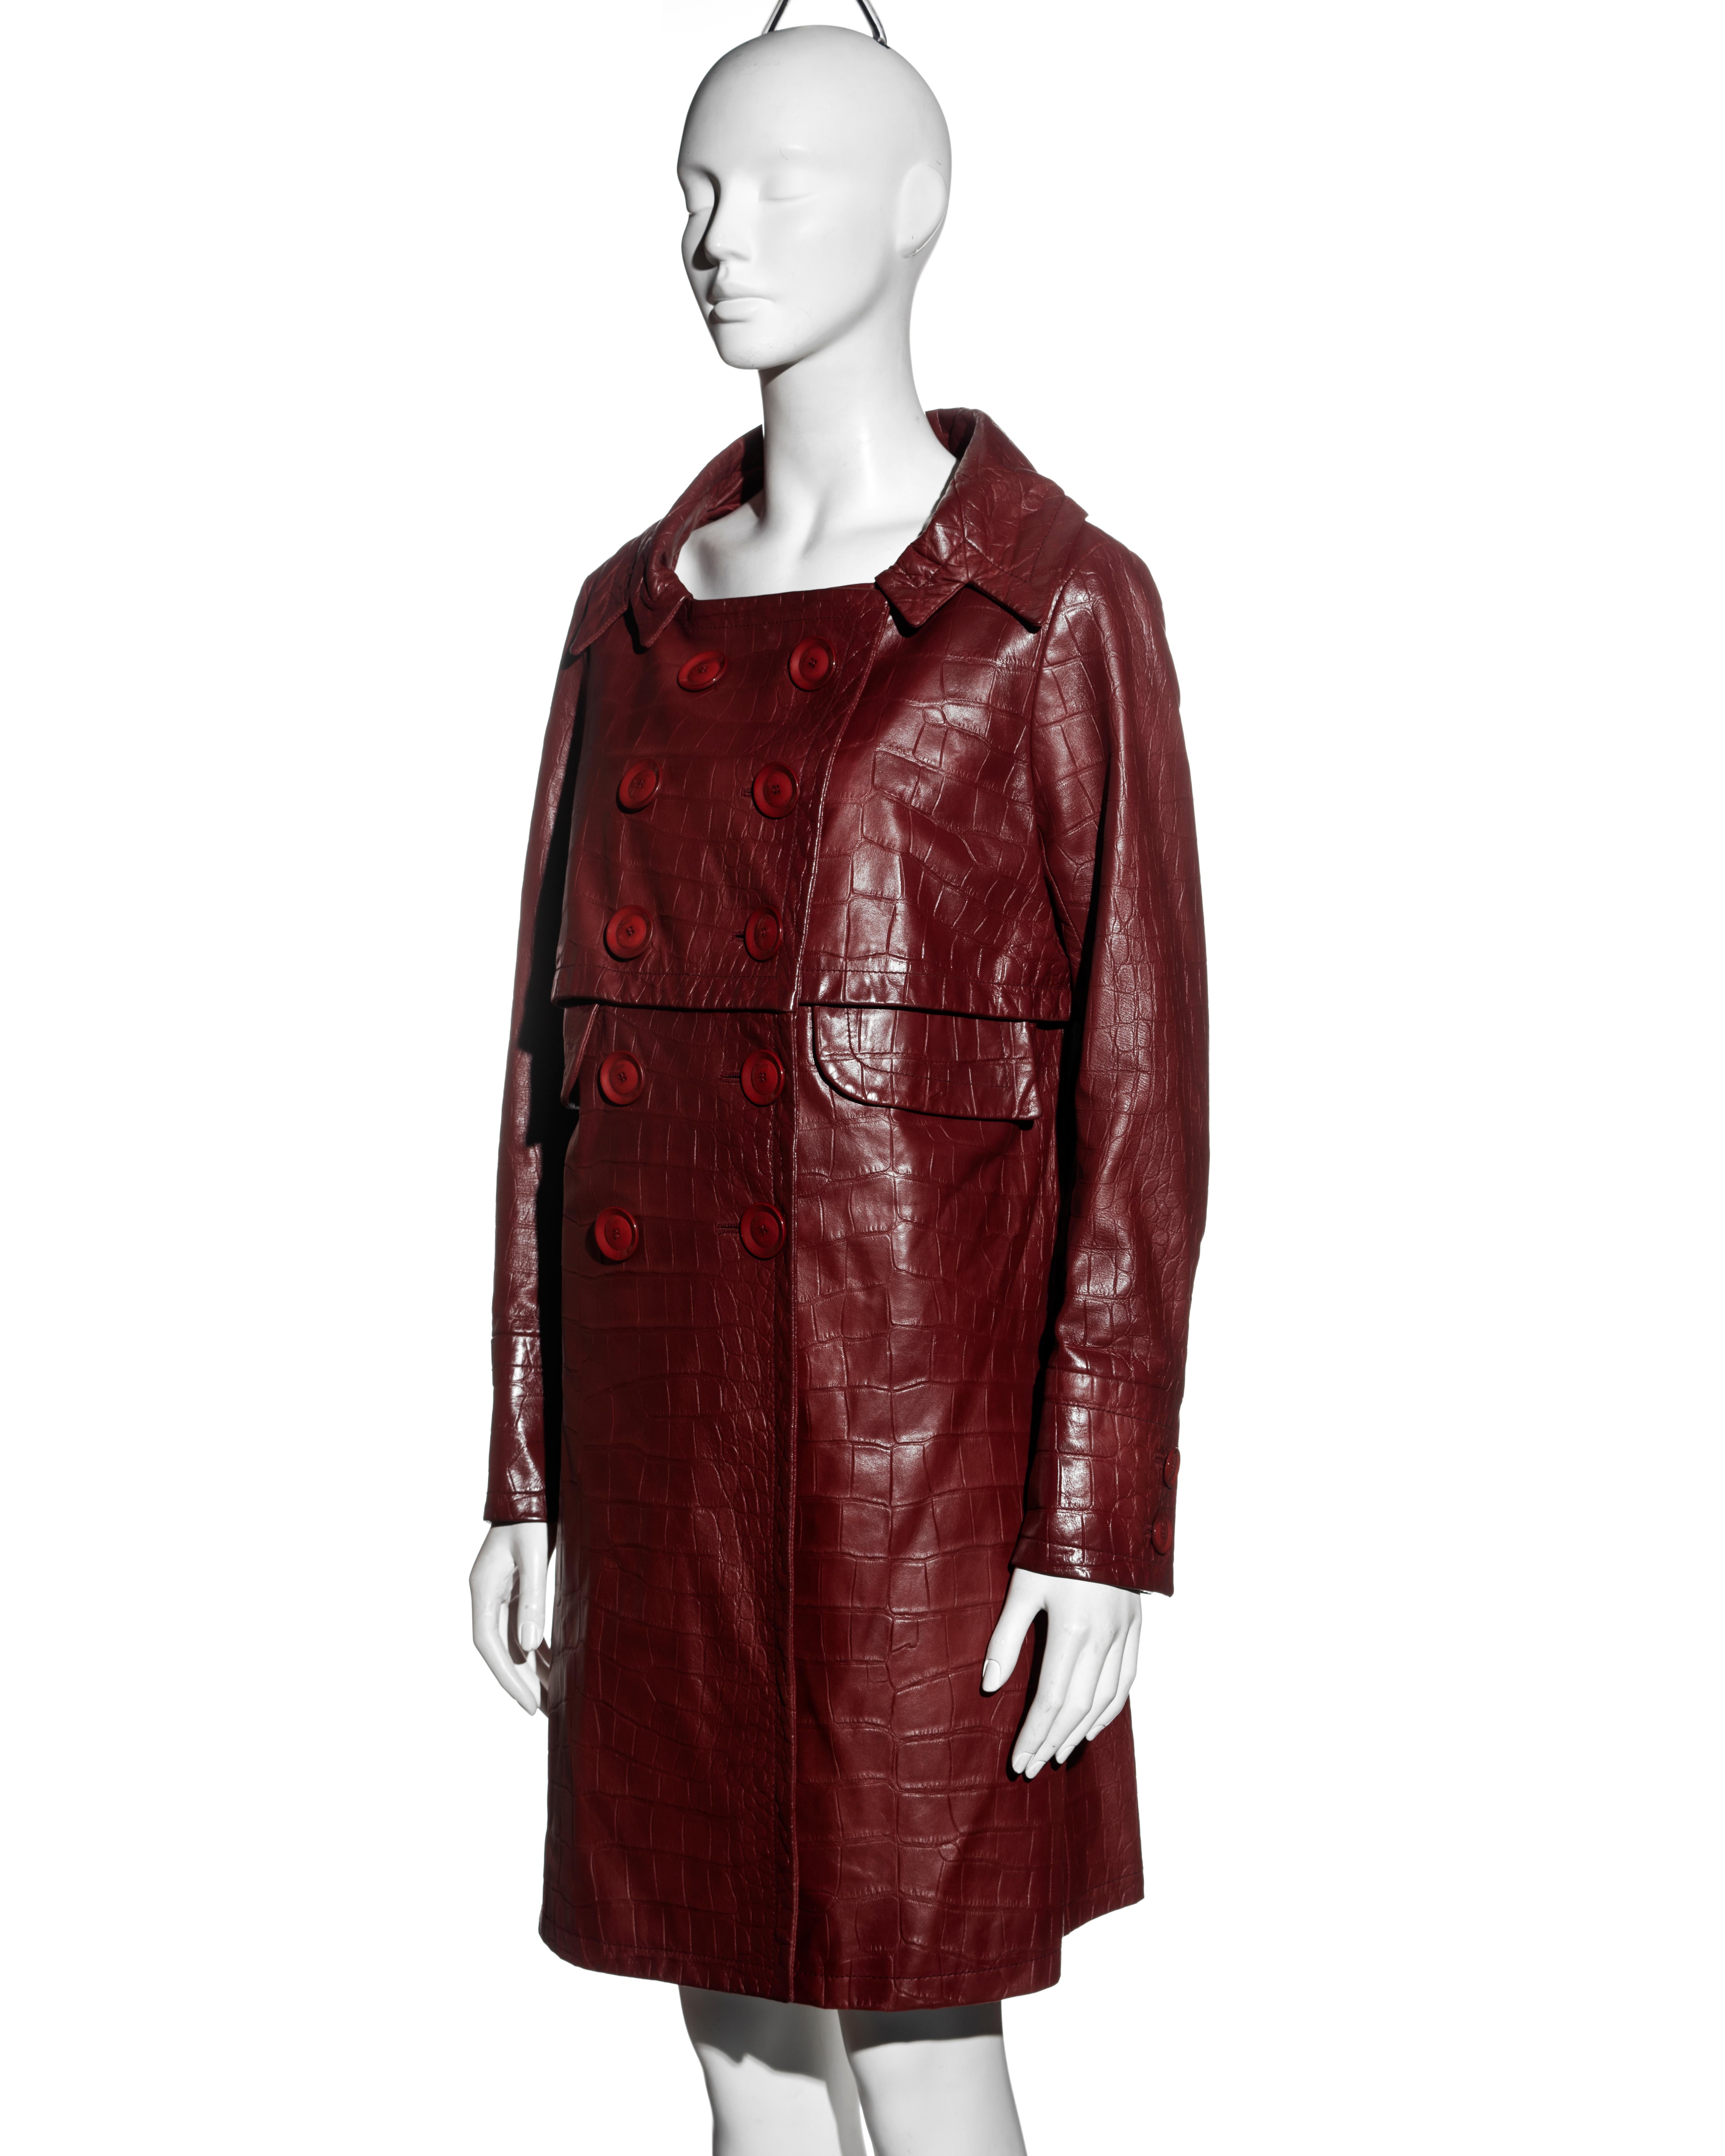 Christian Dior by John Galliano red croc-embossed lambskin leather coat, fw 2005 For Sale 1